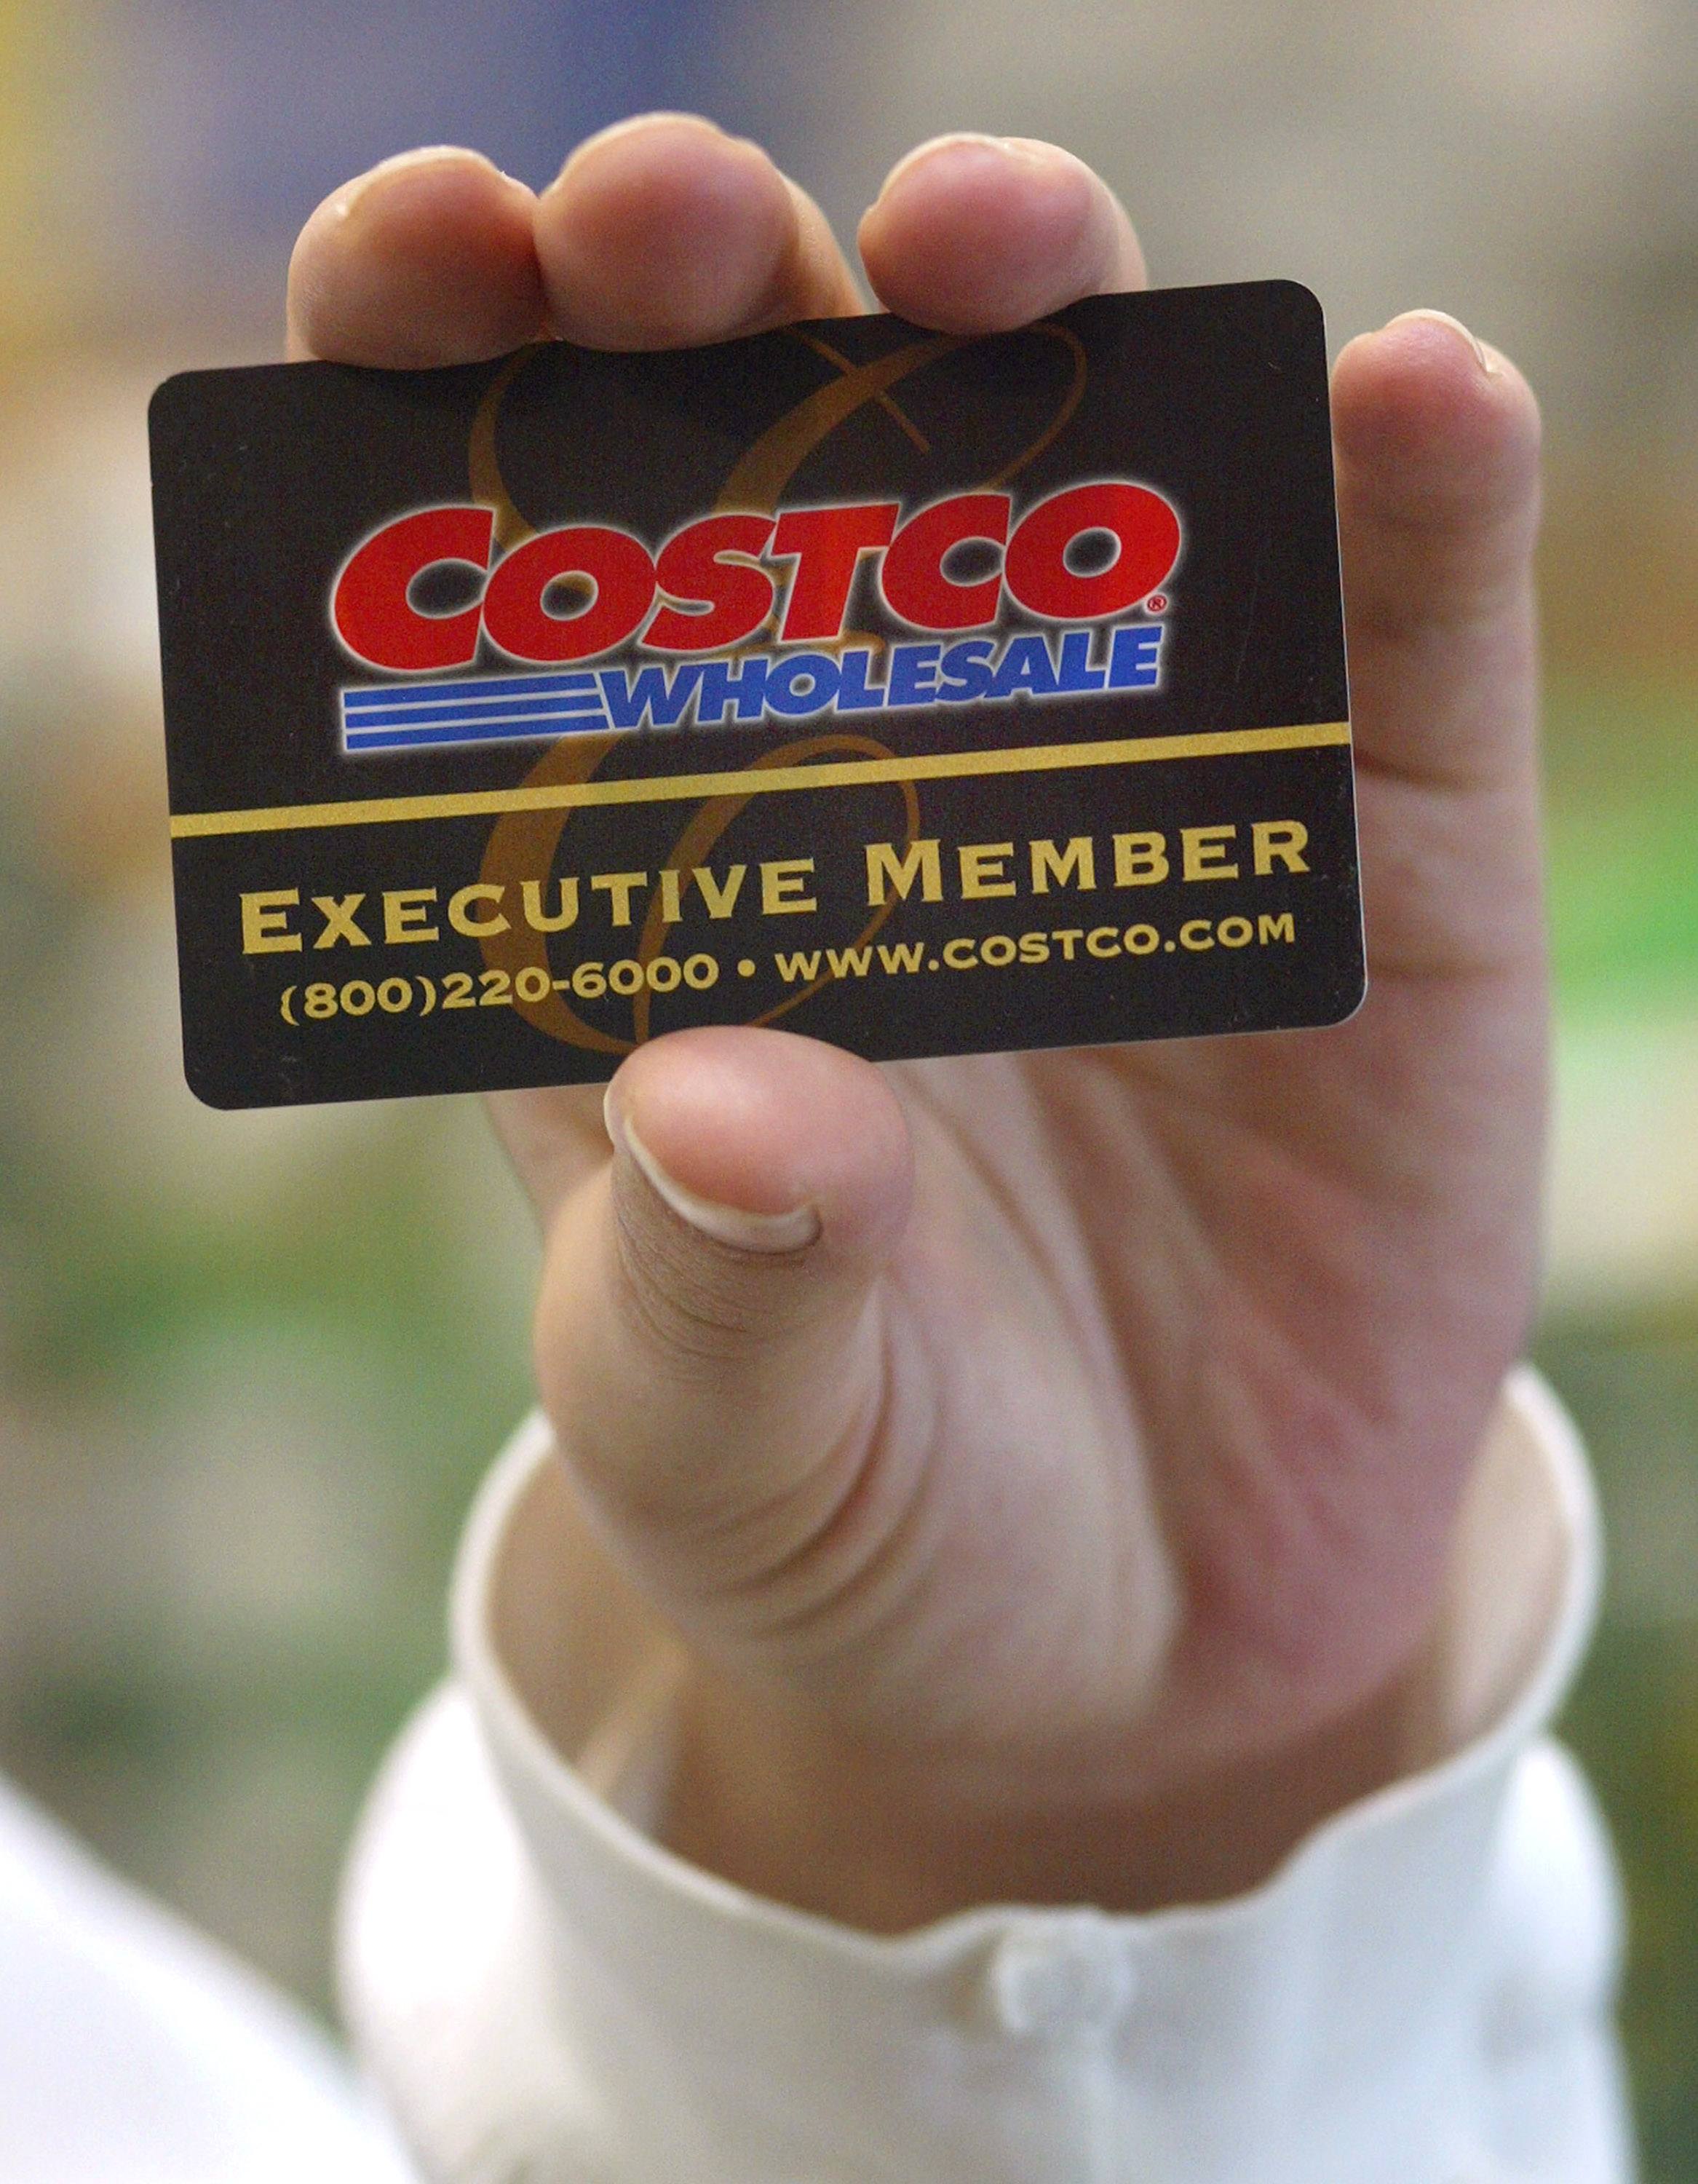 sneaky-little-ways-costco-gets-us-to-spend-more-money-we-fall-for-it-every-time